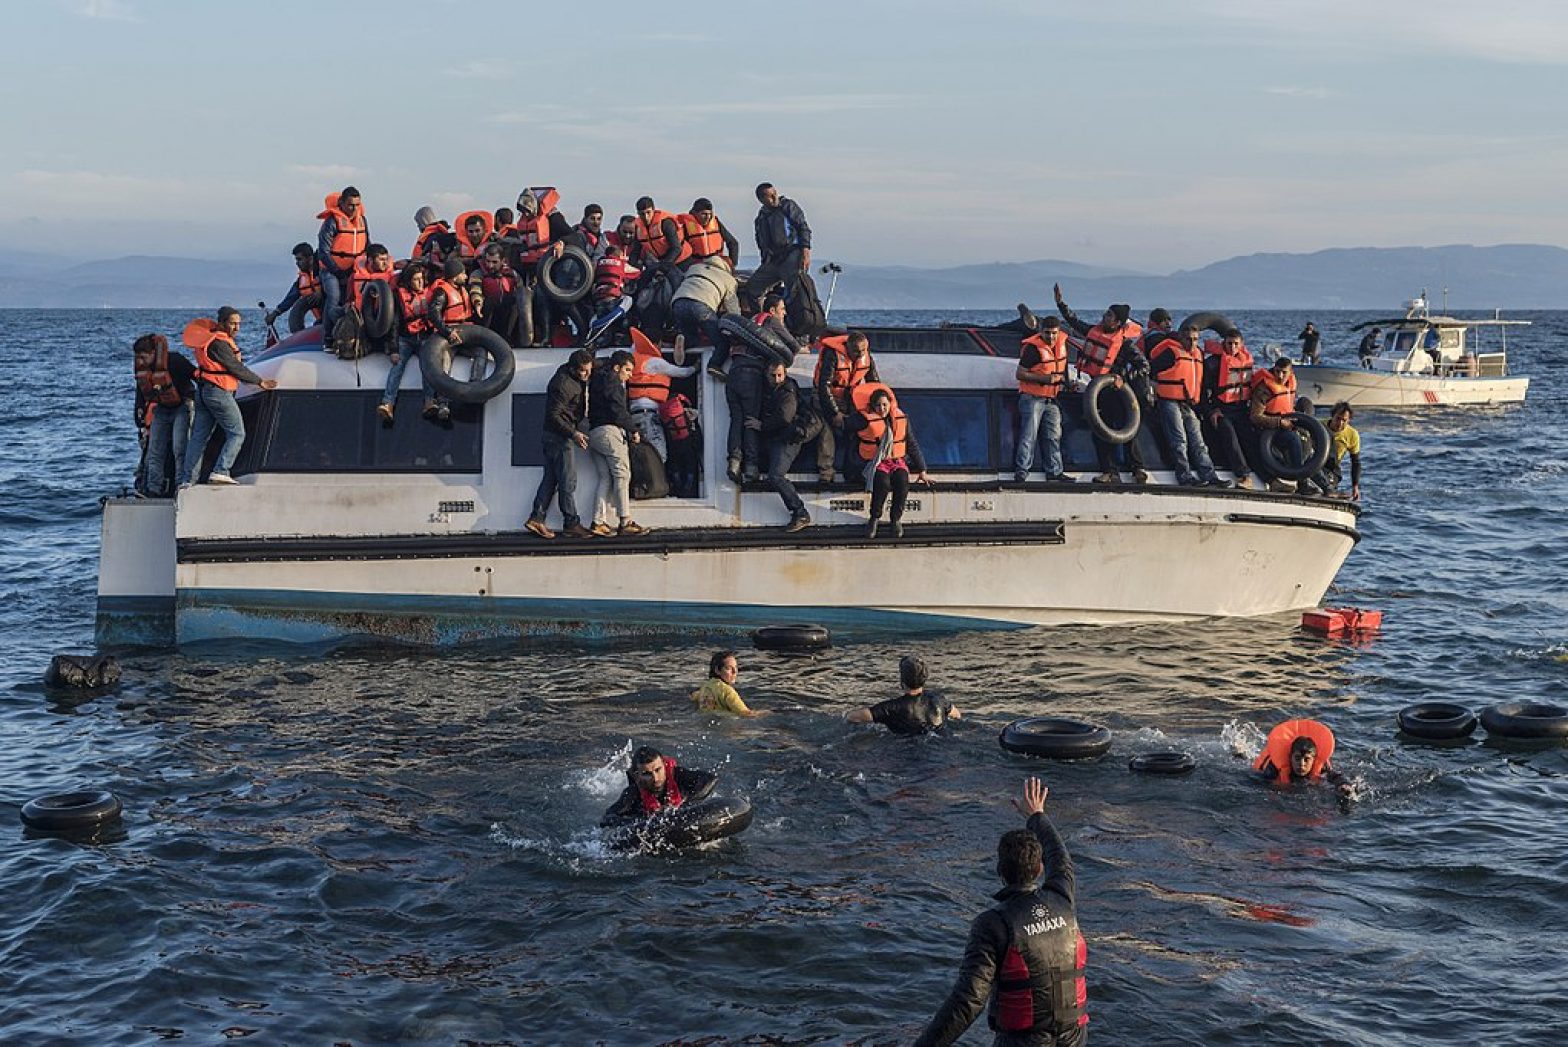 1024px-20151030_syrians_and_iraq_refugees_arrive_at_skala_sykamias_lesvos_greece_2.jpg